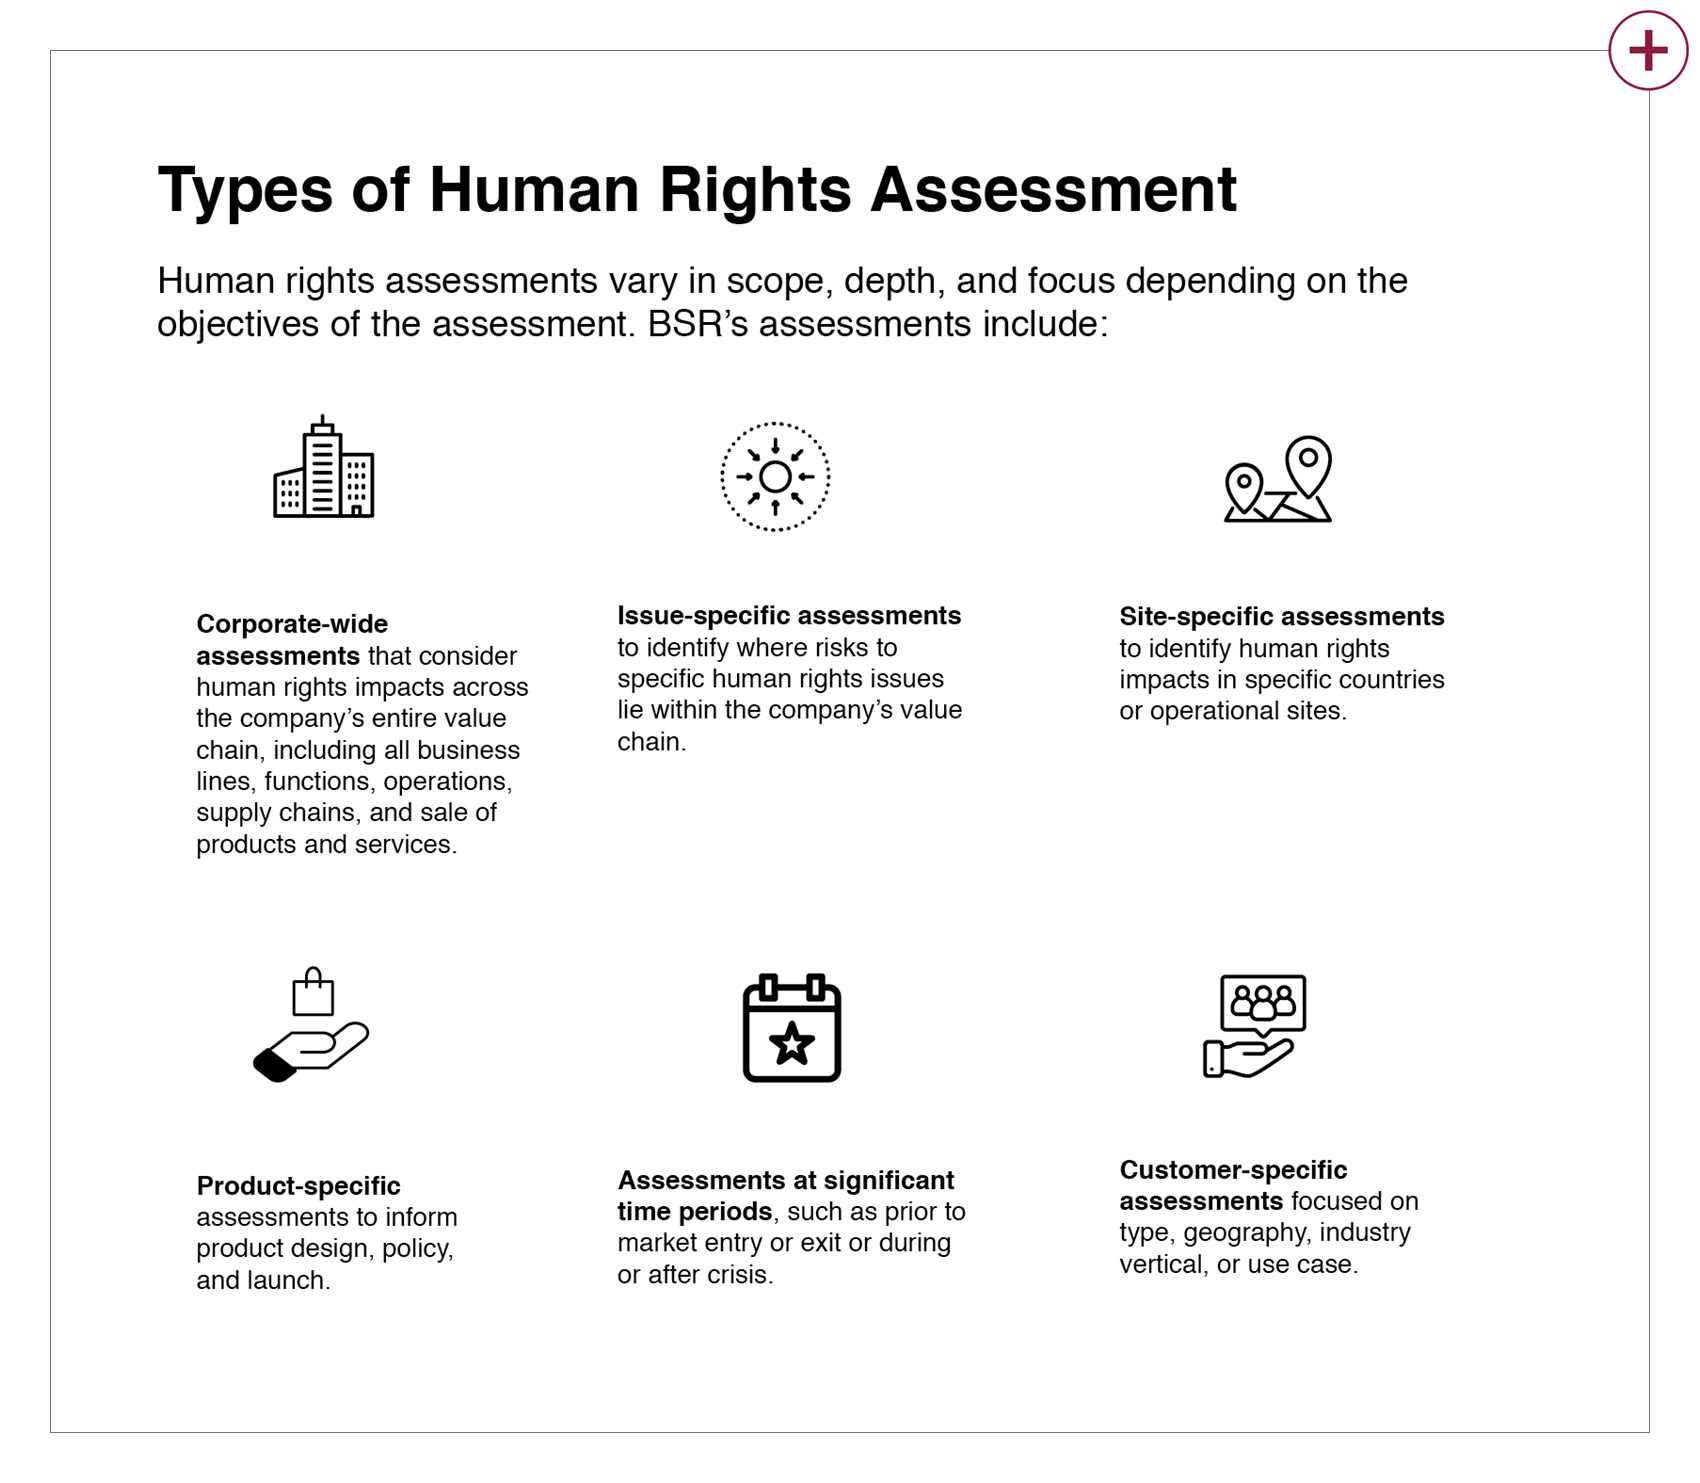 Types of Human Rights Assessment